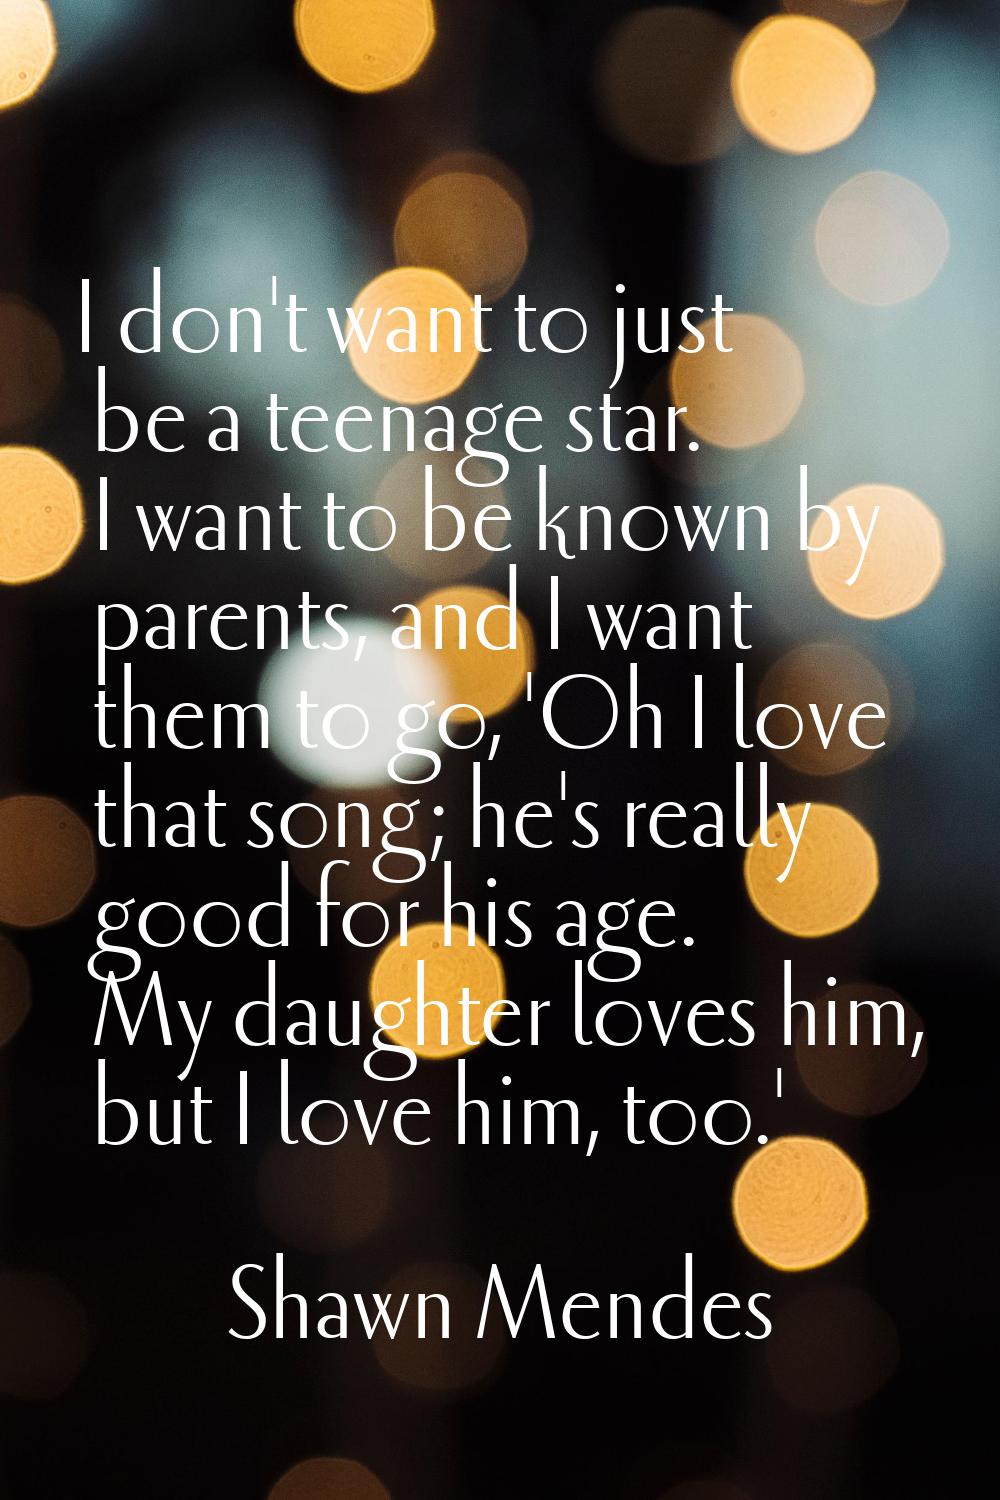 I don't want to just be a teenage star. I want to be known by parents, and I want them to go, 'Oh I